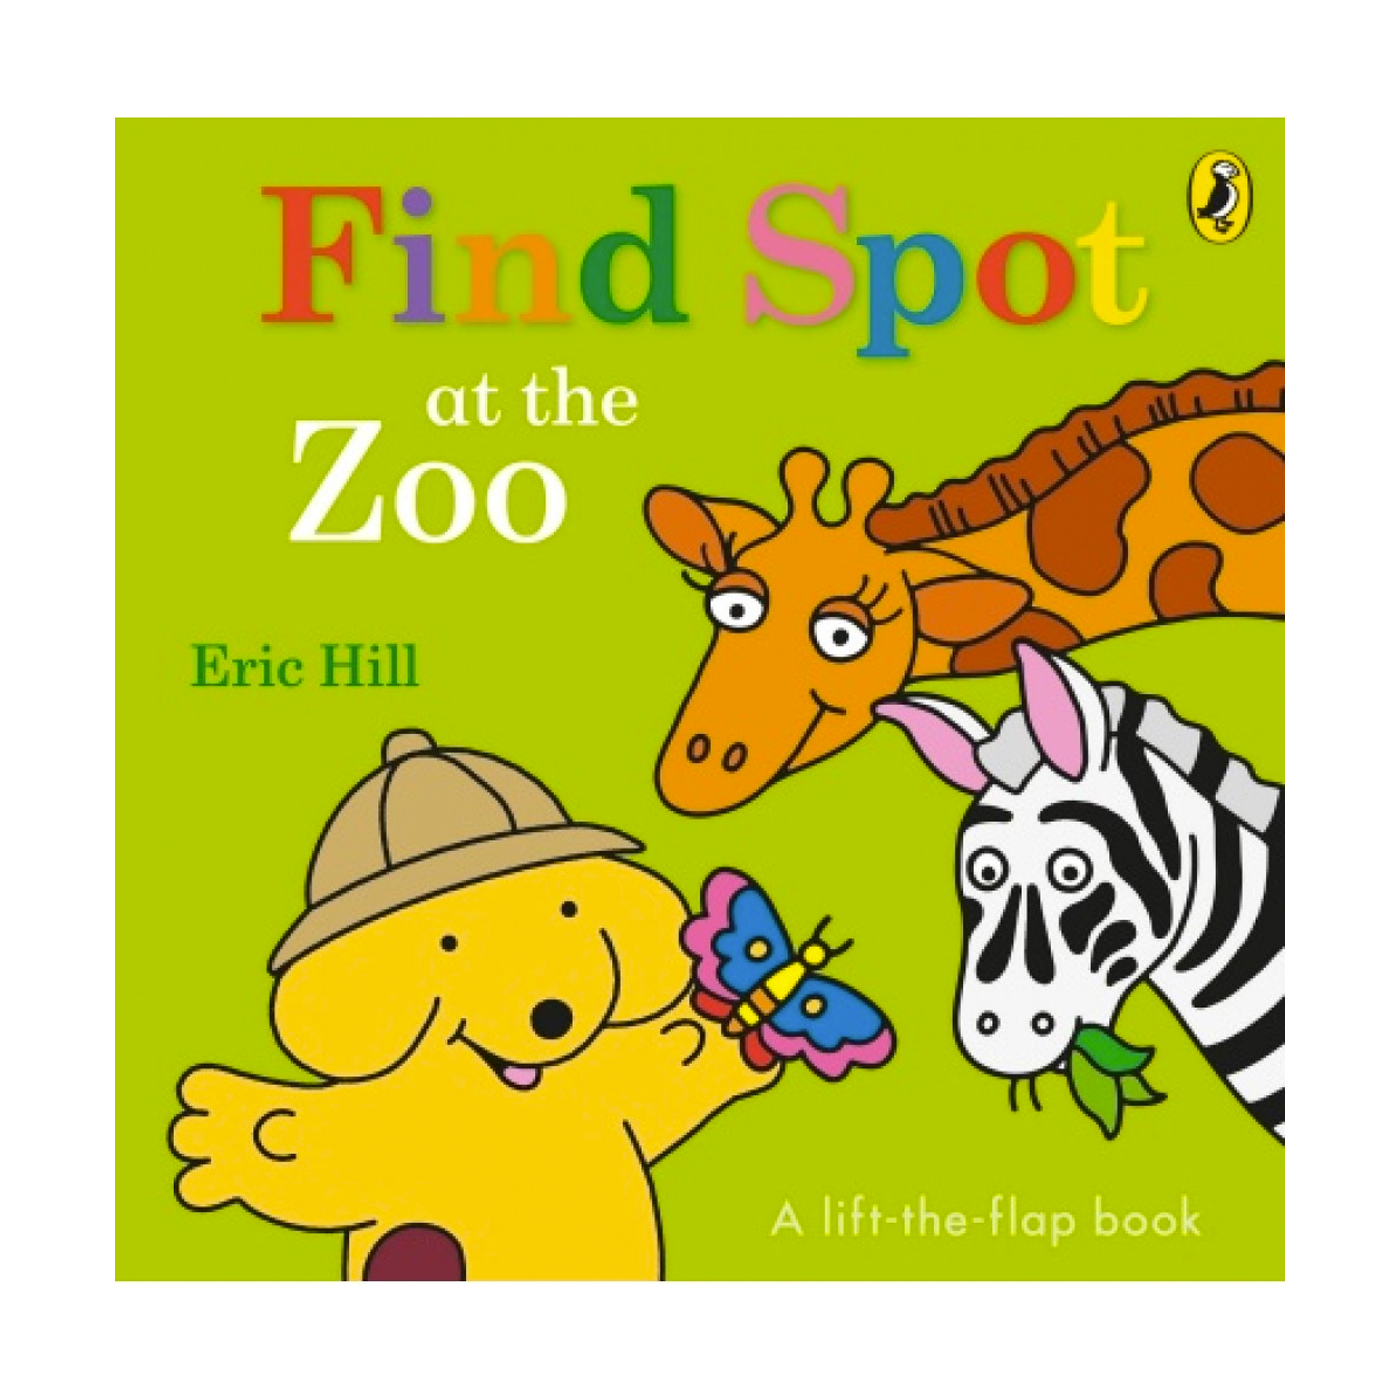  Find Spot at the Zoo